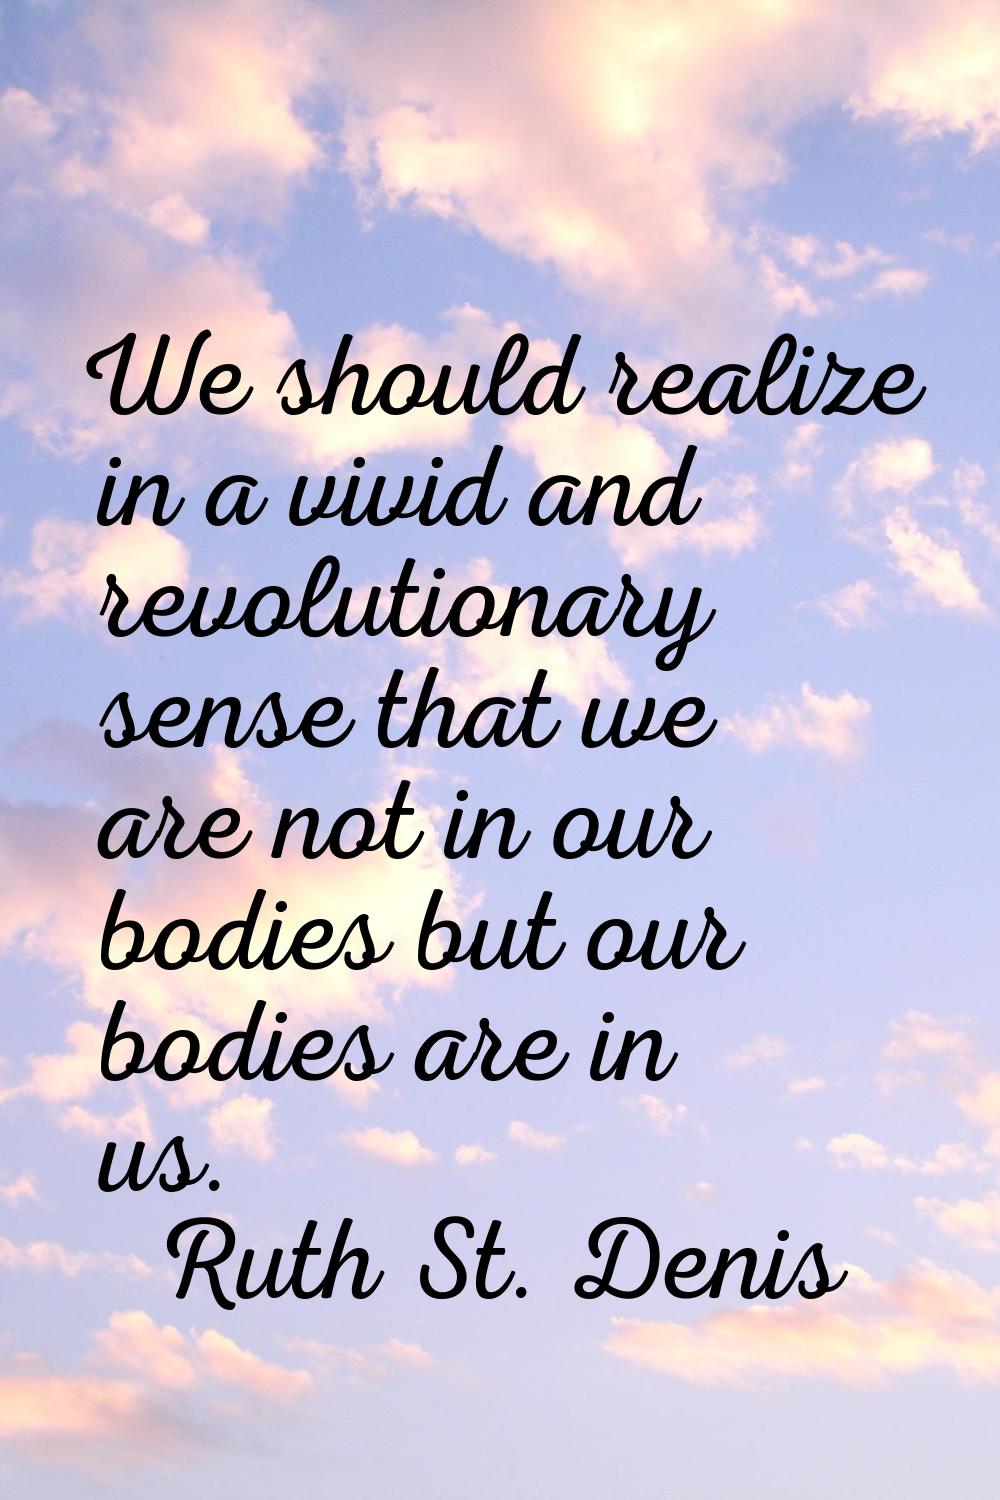 We should realize in a vivid and revolutionary sense that we are not in our bodies but our bodies a